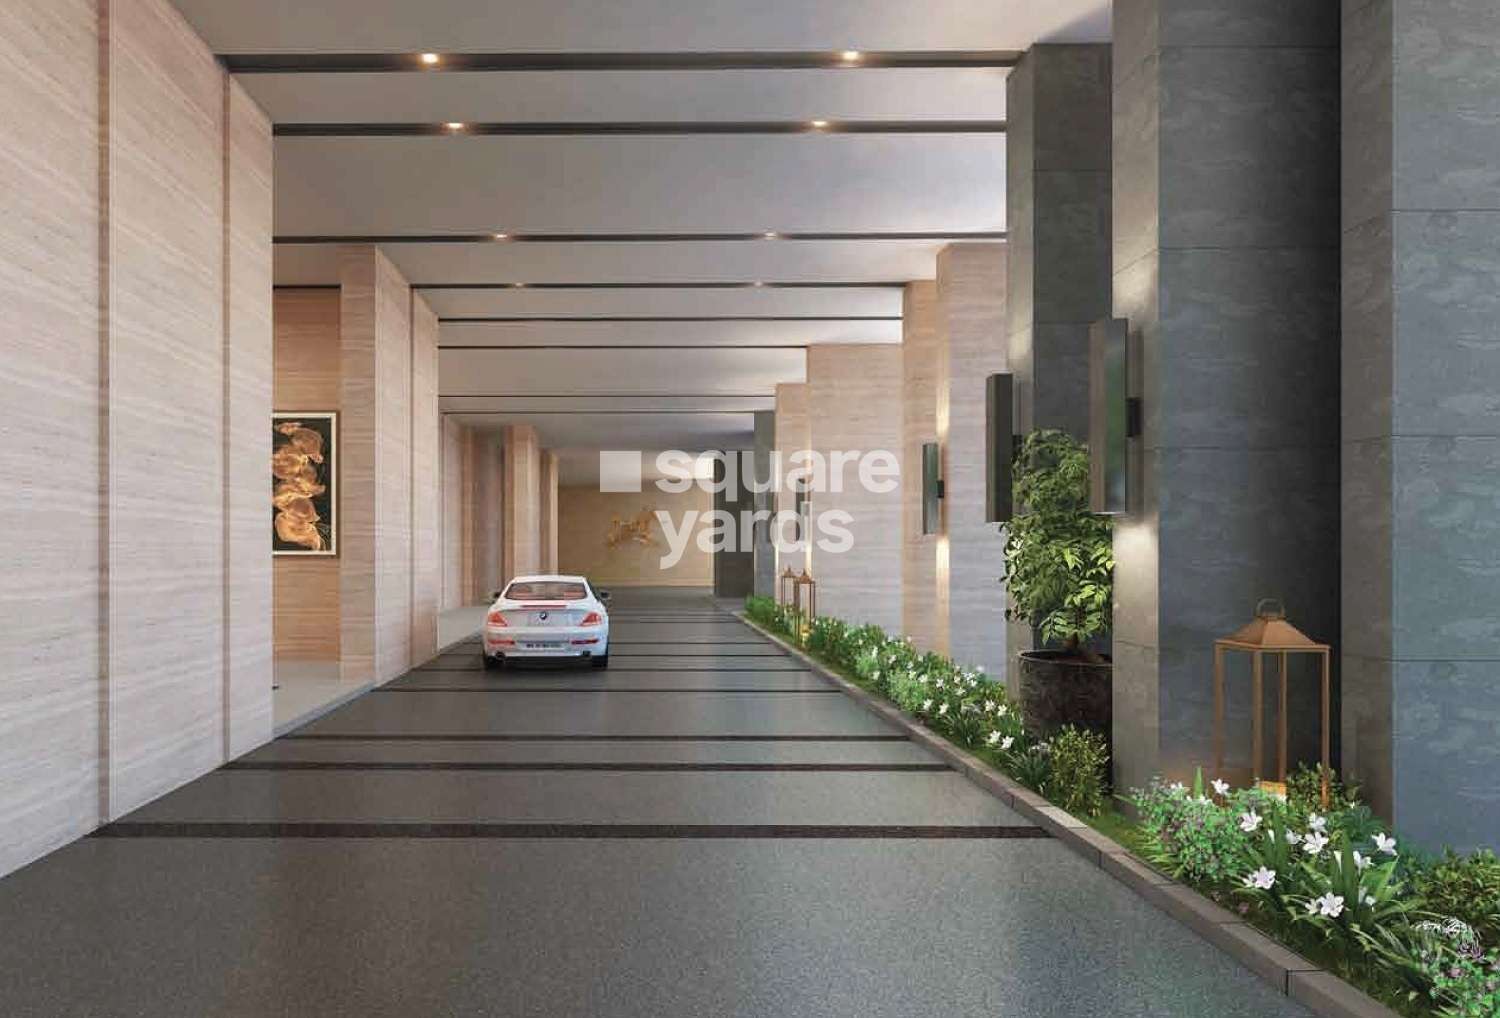 oberoi maxima project amenities features6 4991